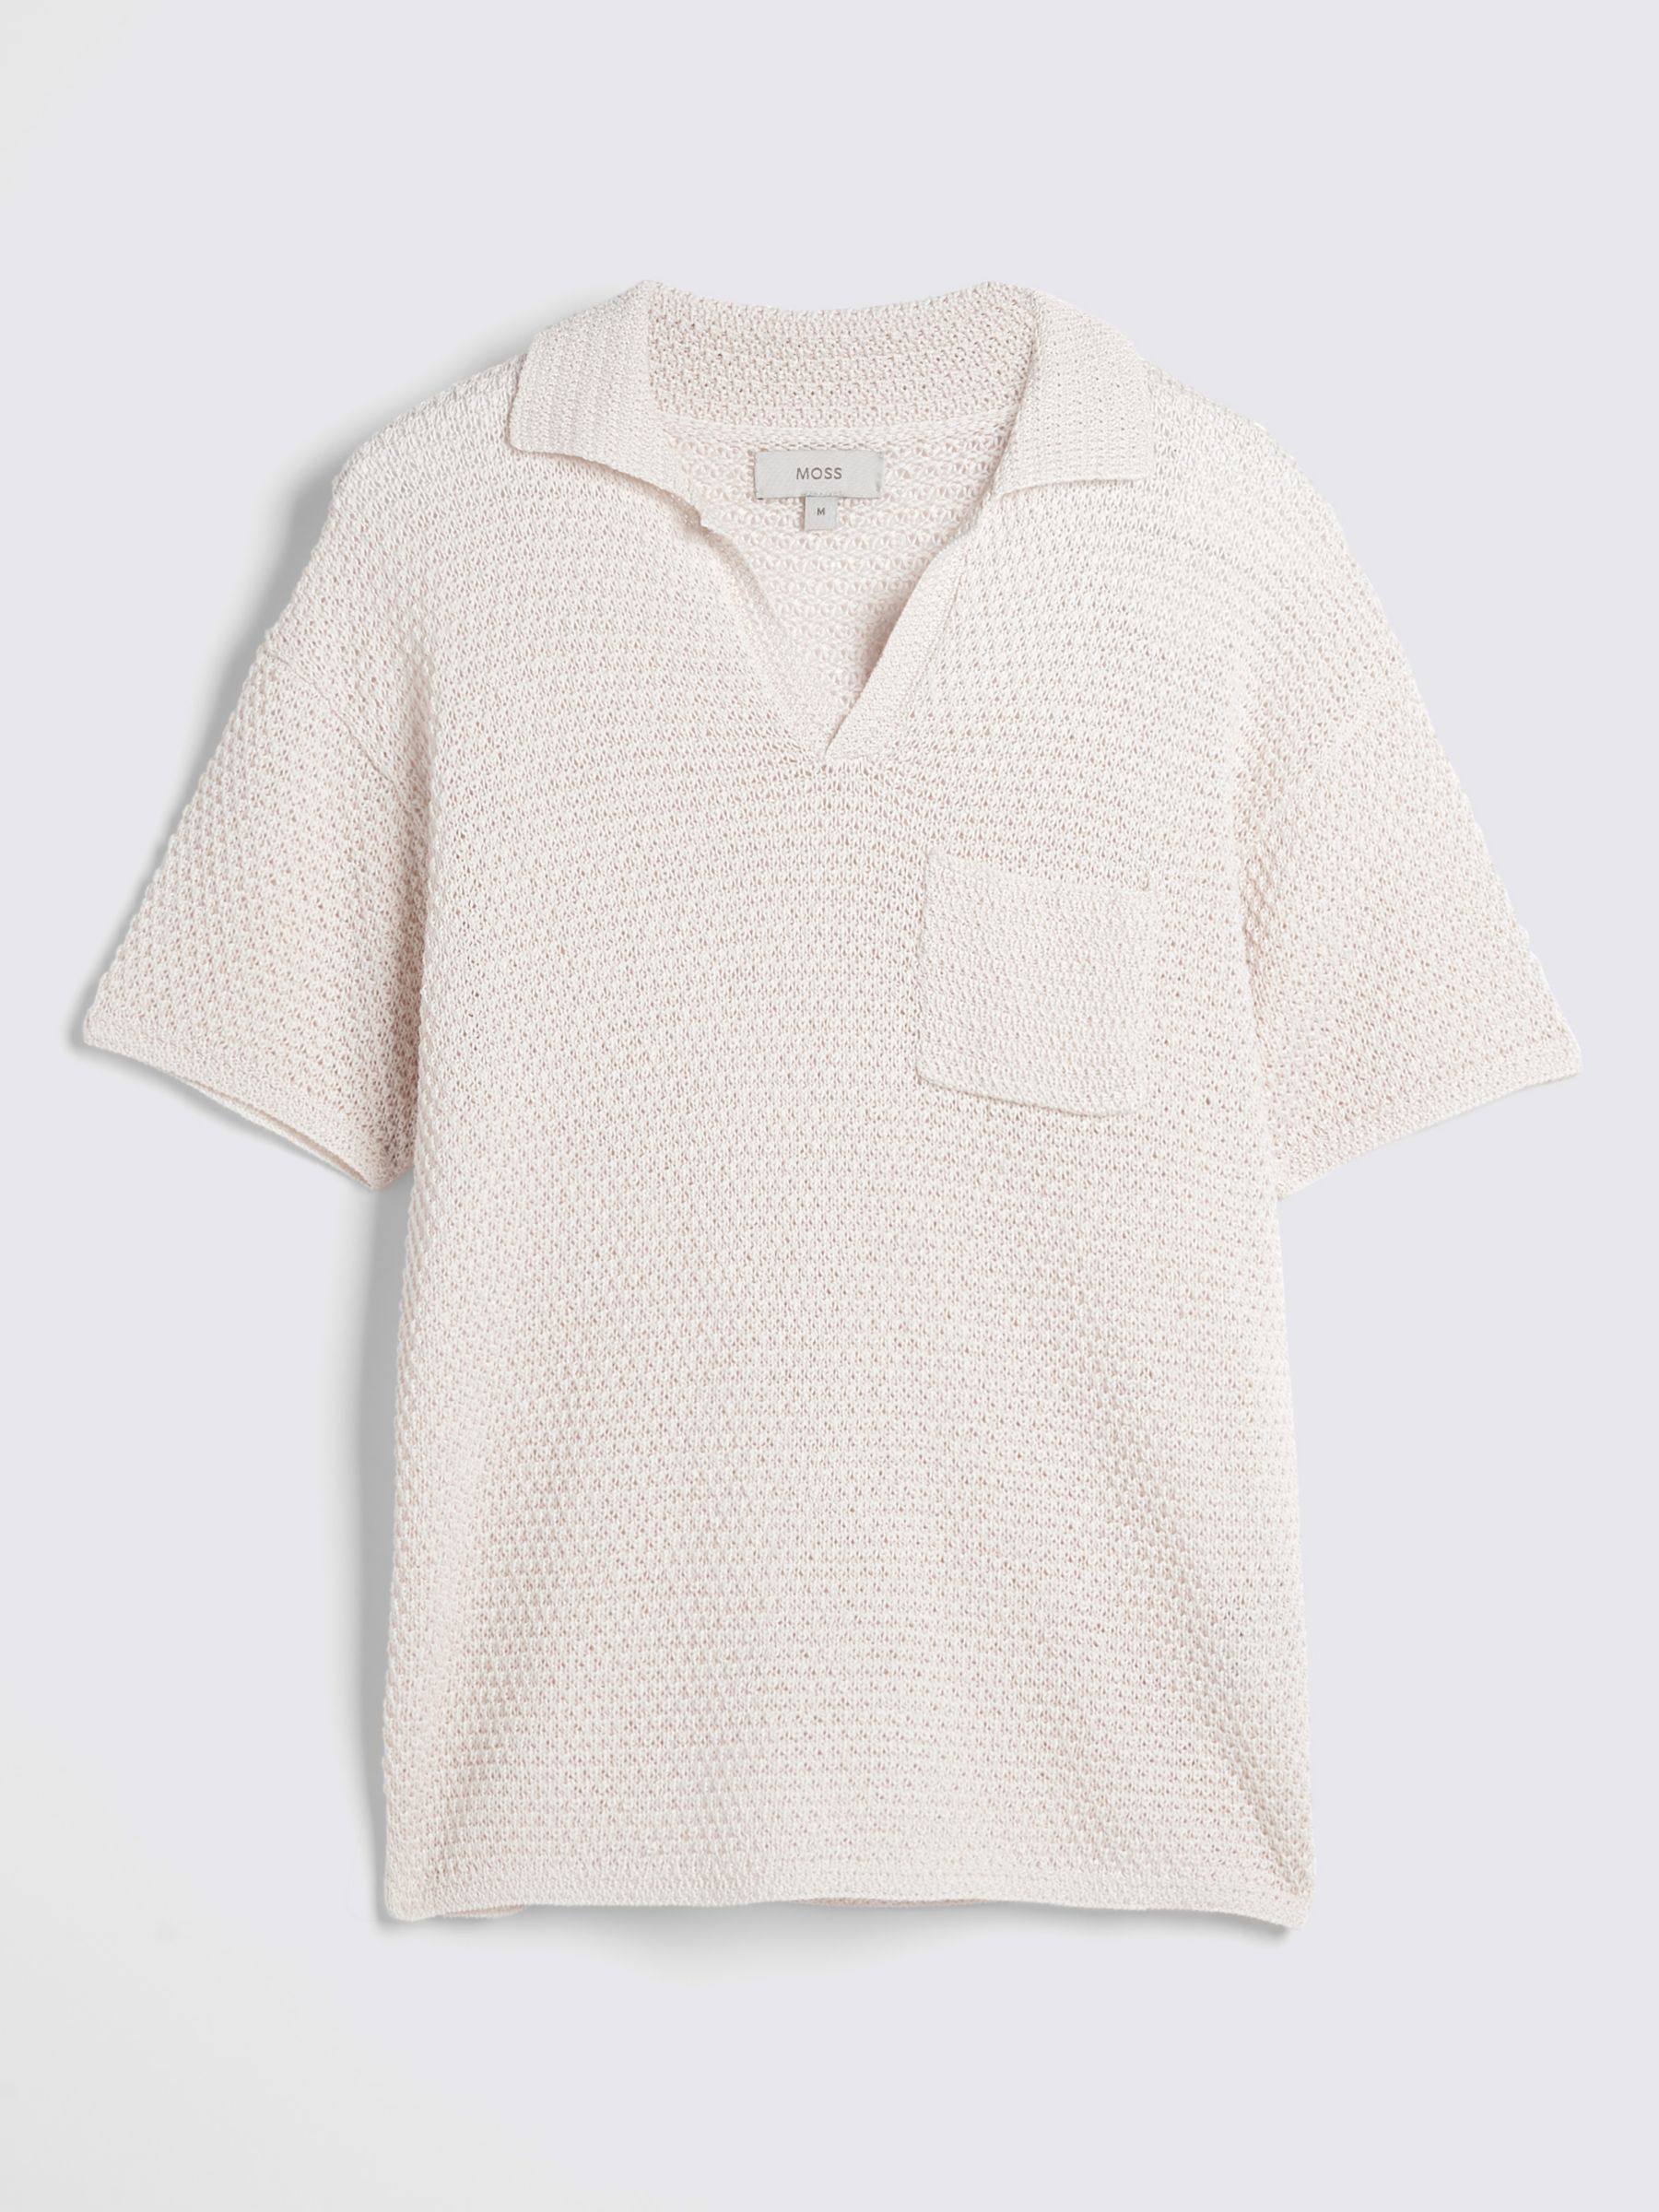 Moss Knitted Polo Top, Beige, XXL